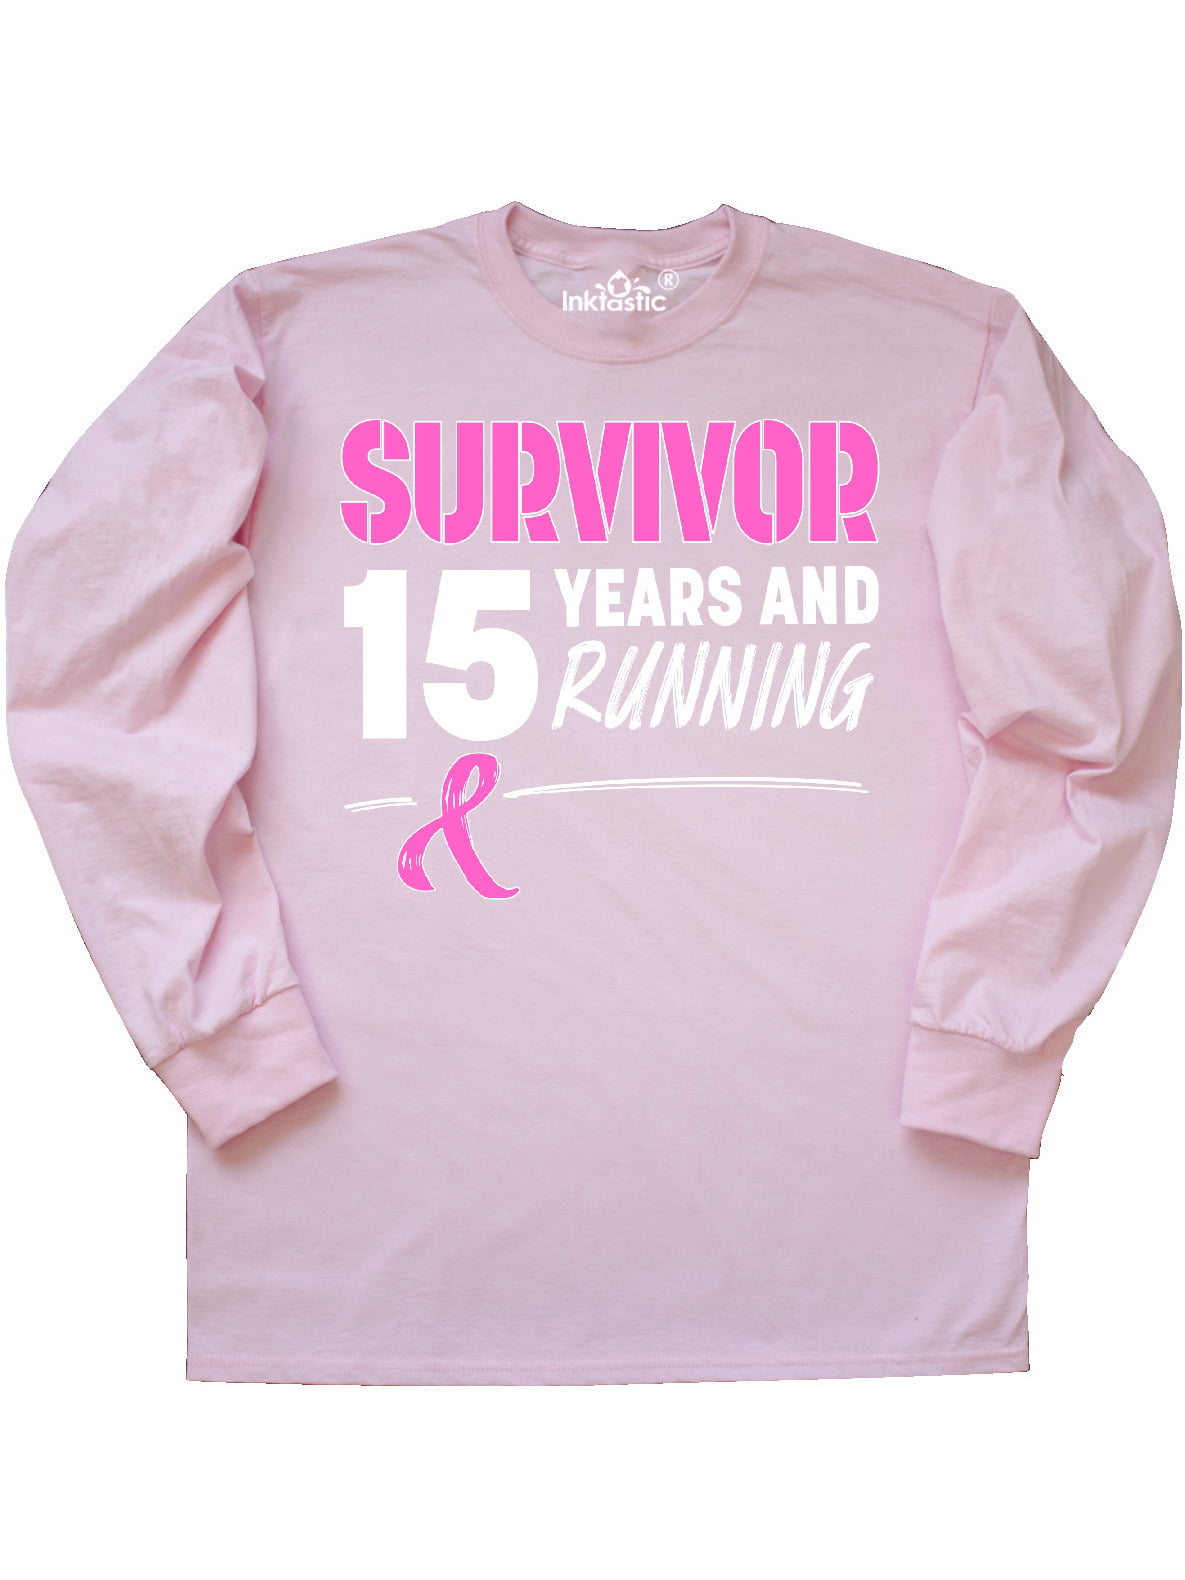 Beautiful Uncle Breast Cancer Survivor Long Sleeve T-Shirt Unisex Shirts Gifts for Breast Cancer